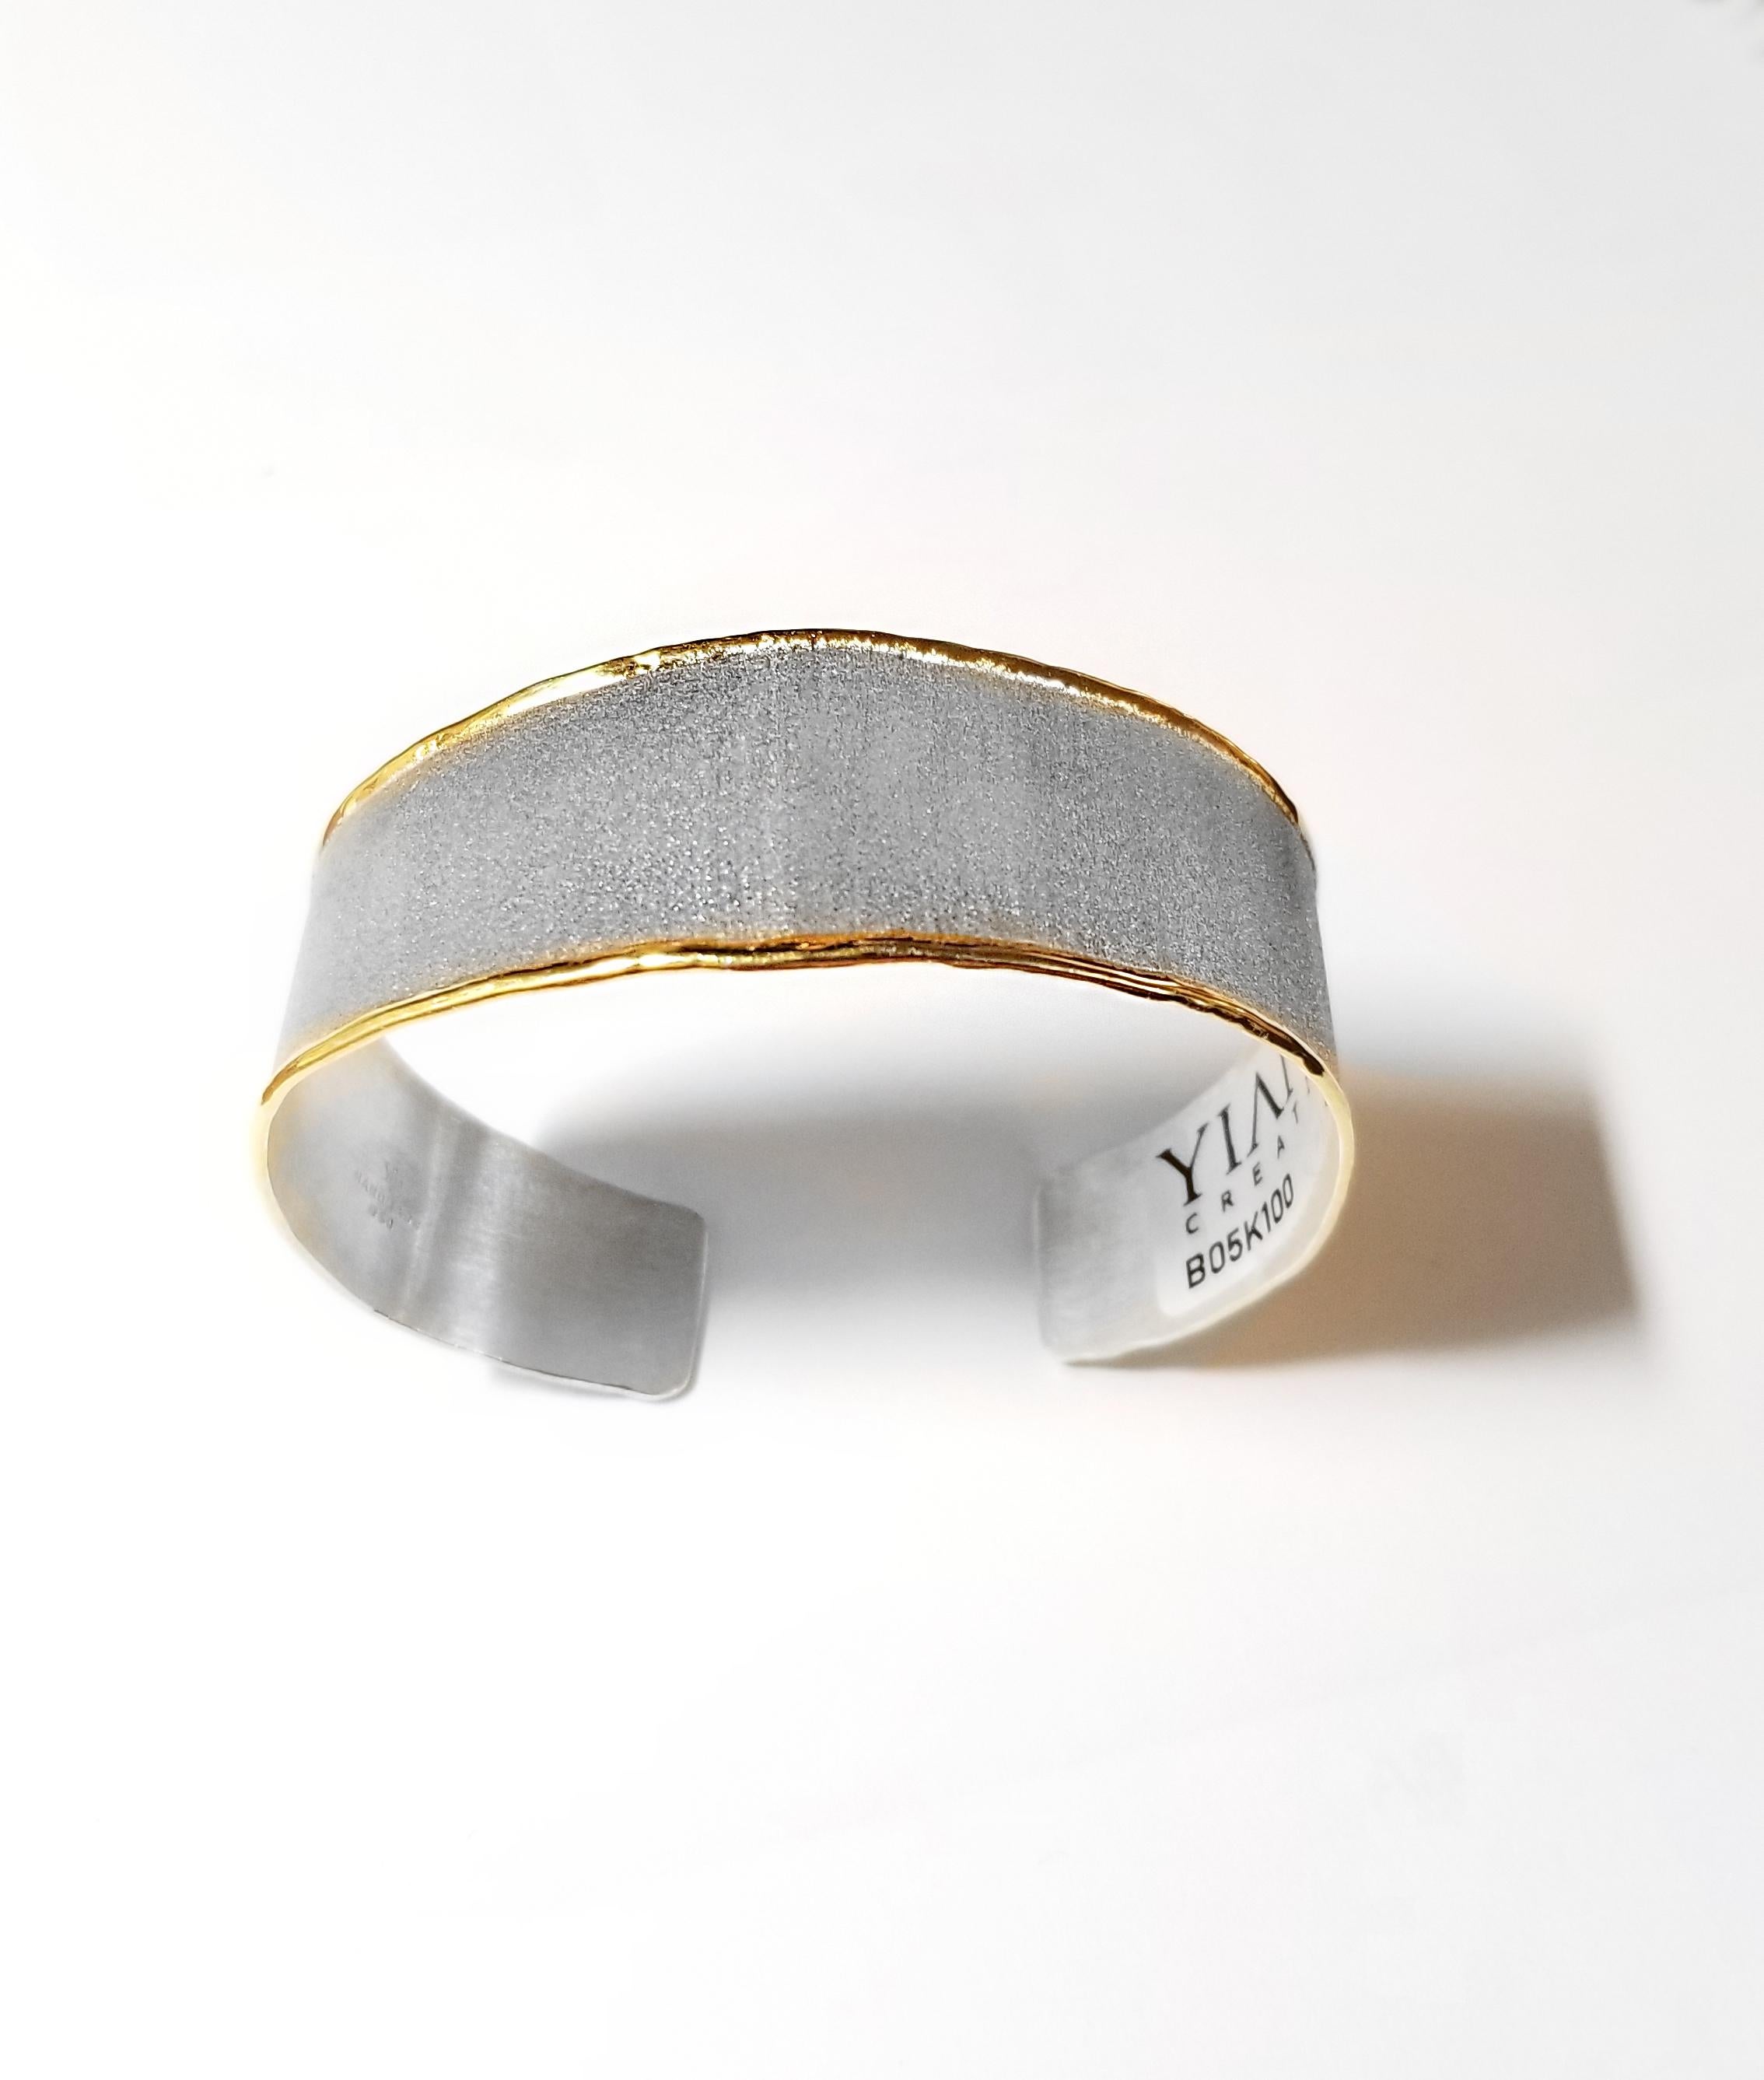 Contemporary Yianni Creations Pure Style Fine Silver and 24 Karat Gold Bangle Bracelet